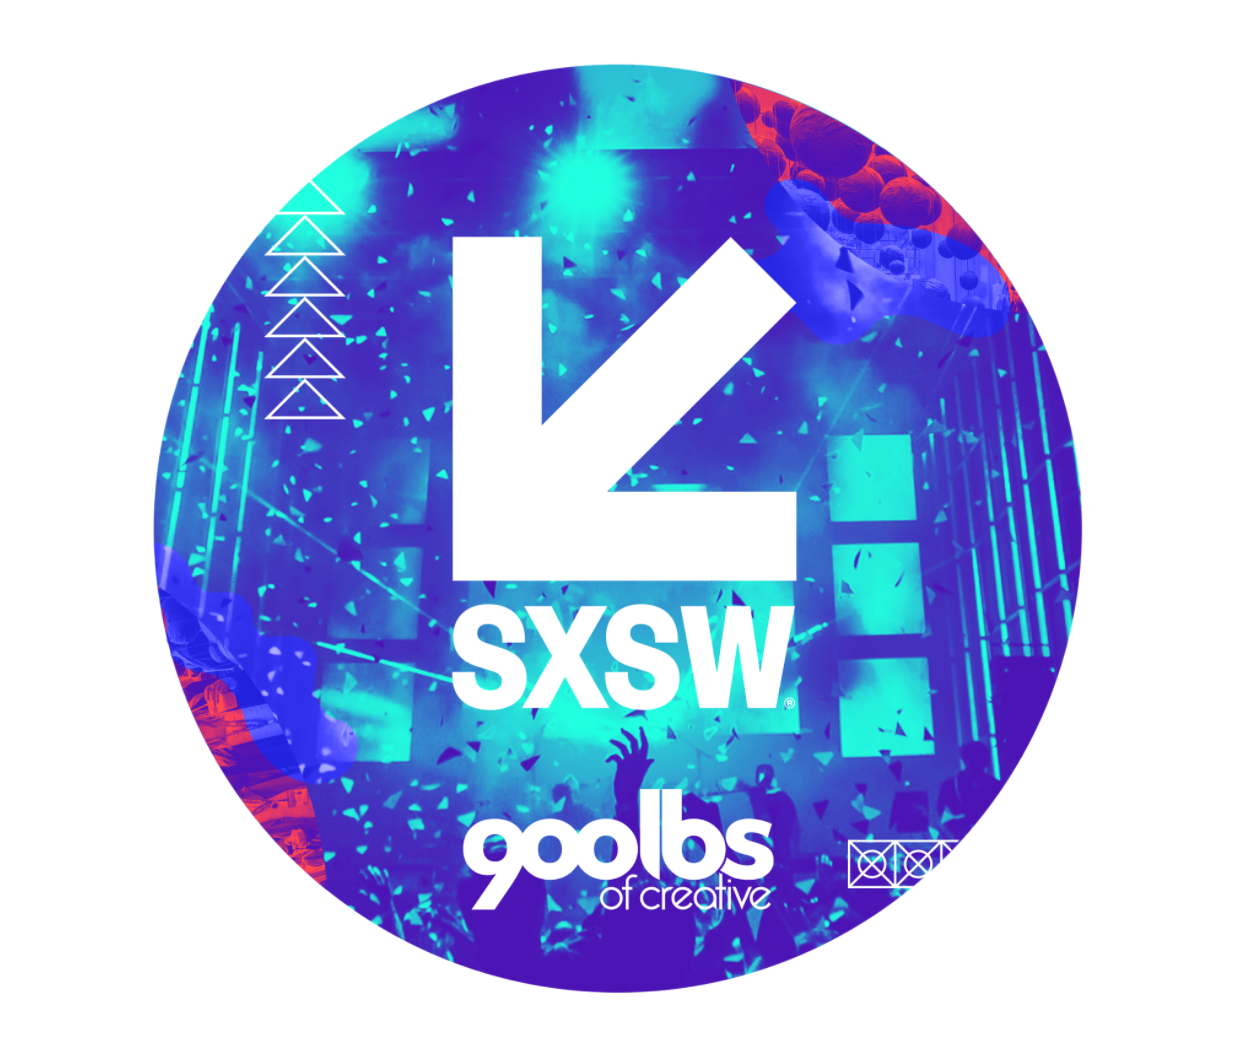 Get The Sxsw In 360 Virtual Experience Without Leaving Your Office